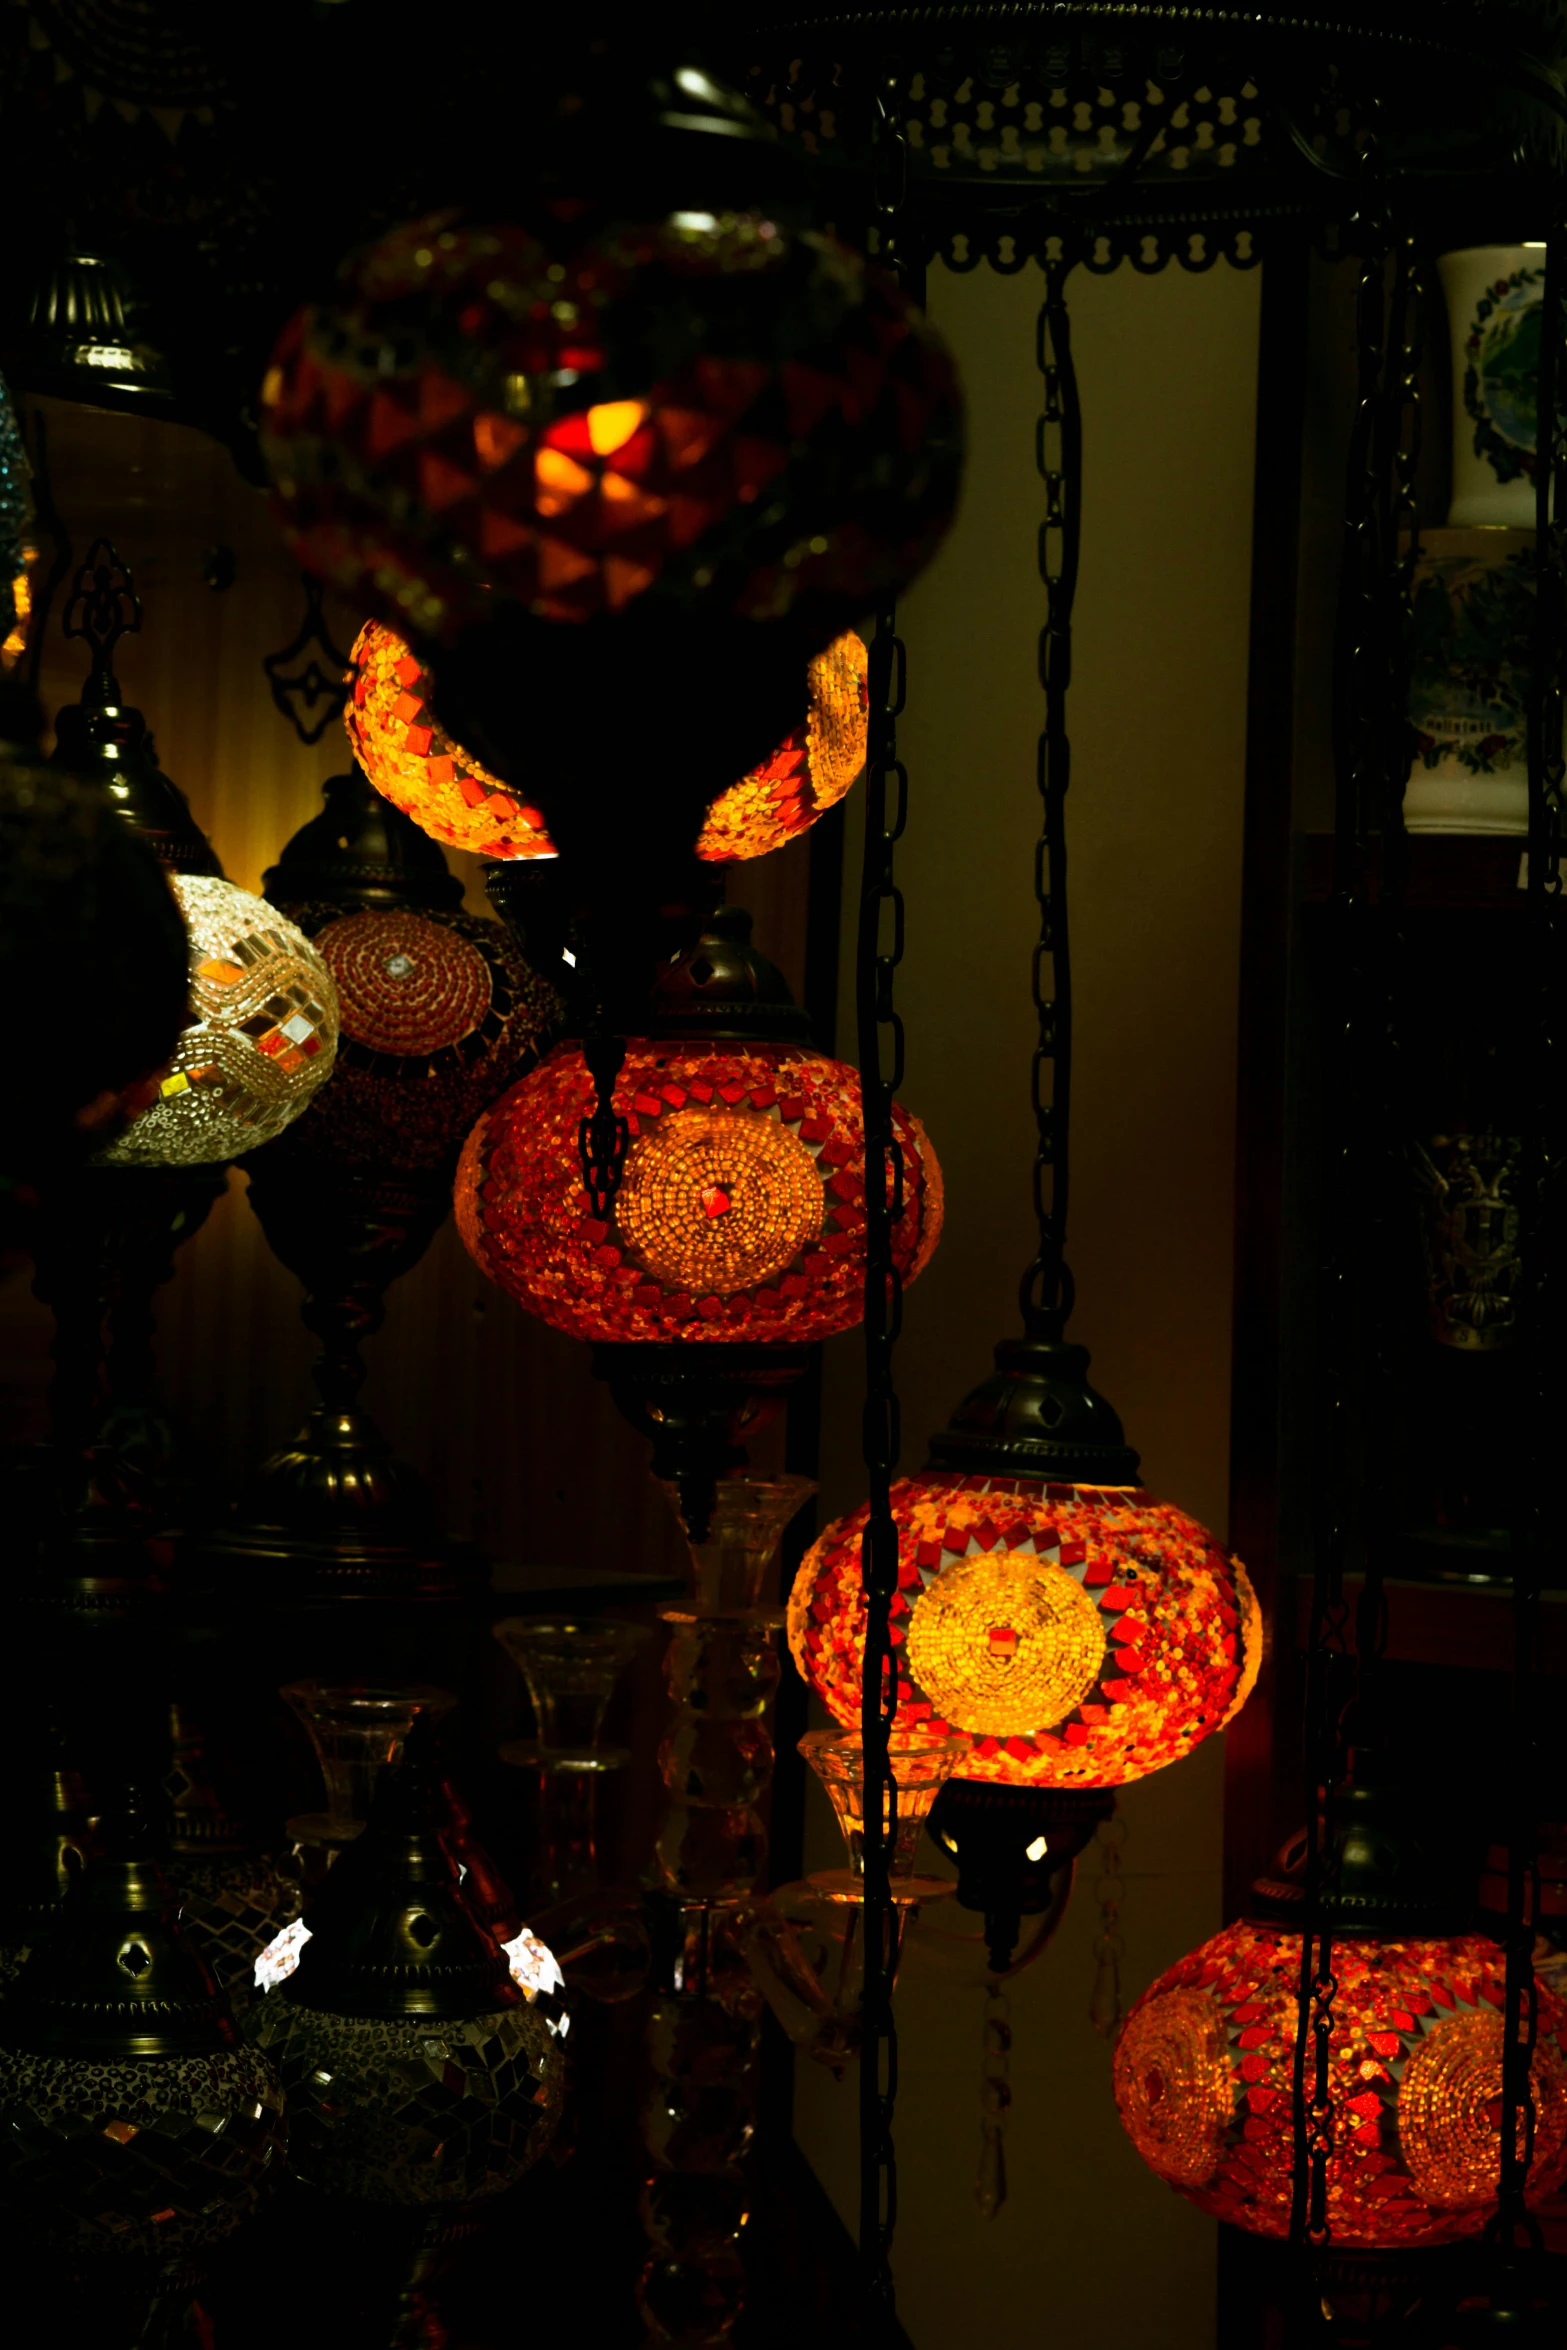 several lamps in the dark are illuminated for light